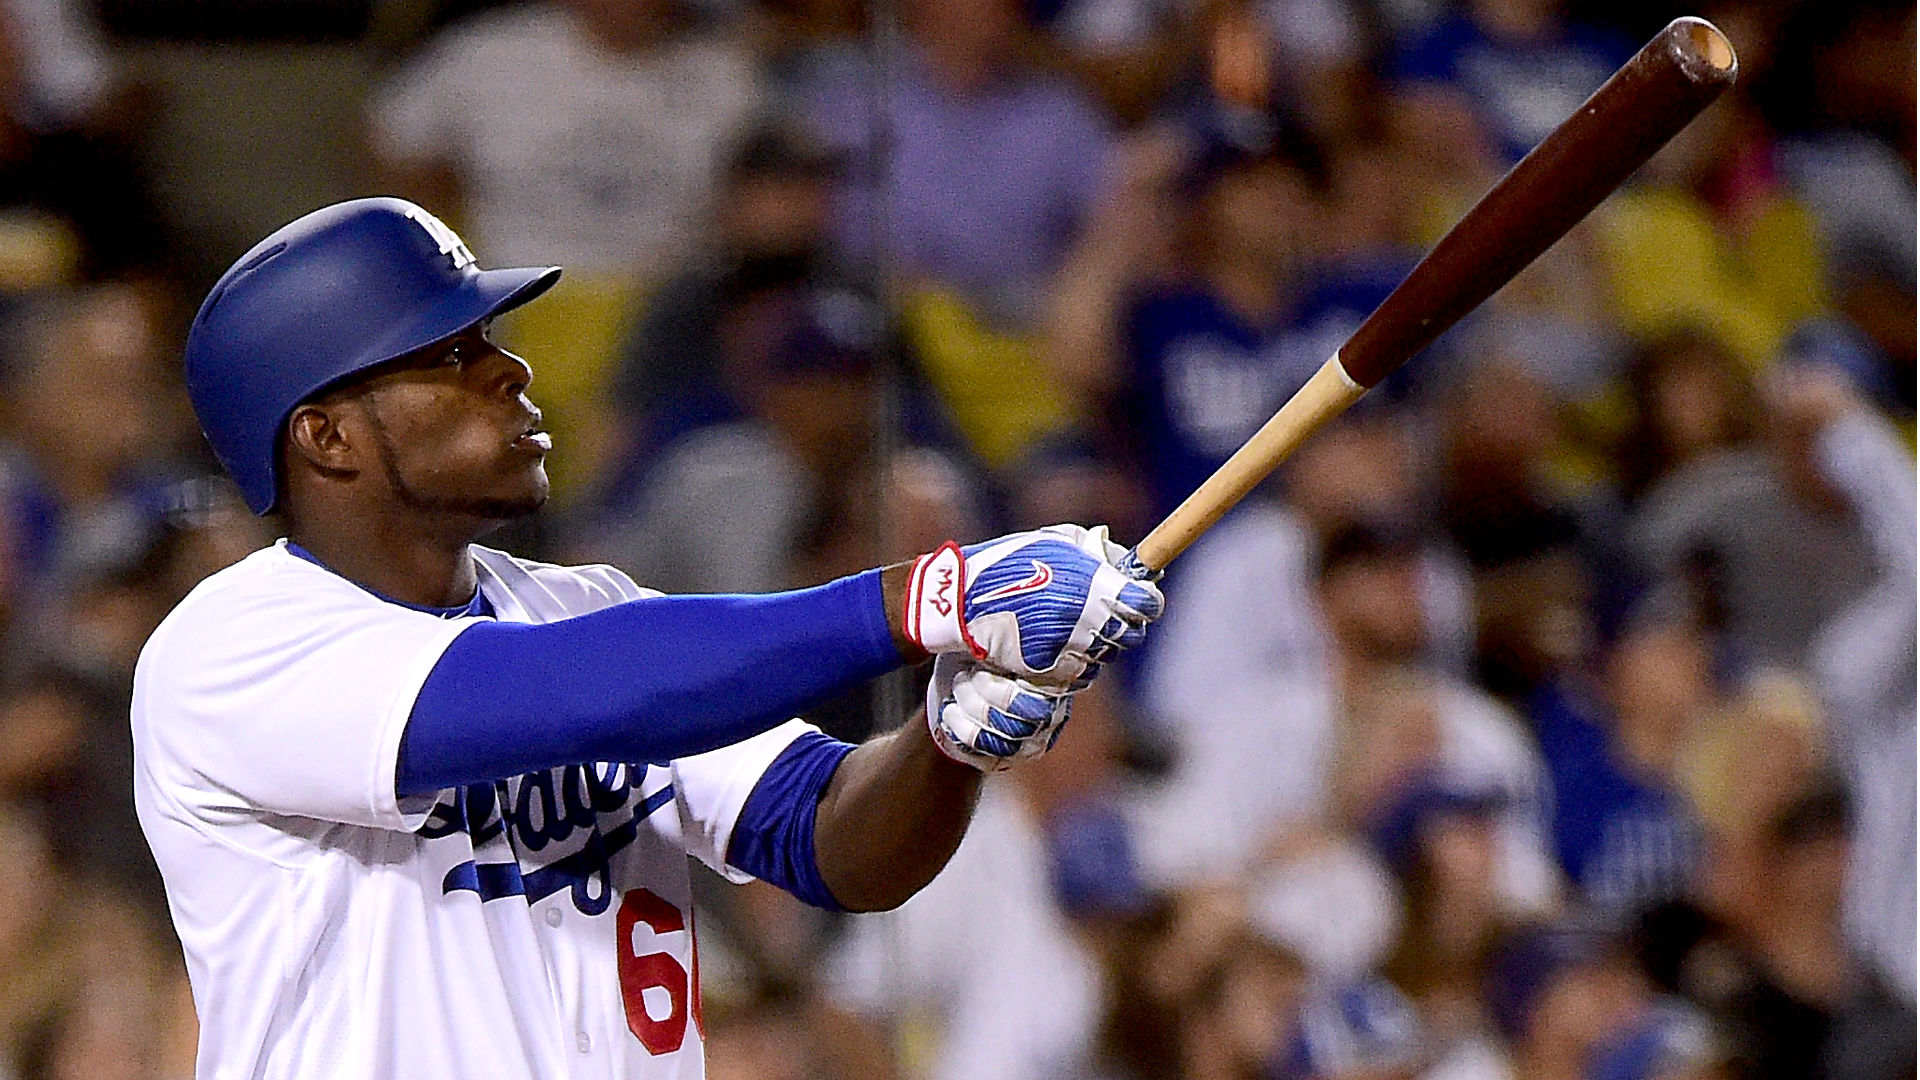 Why Puig's pimping, Dyson's bunting weren't worth getting mad about - Sporting News